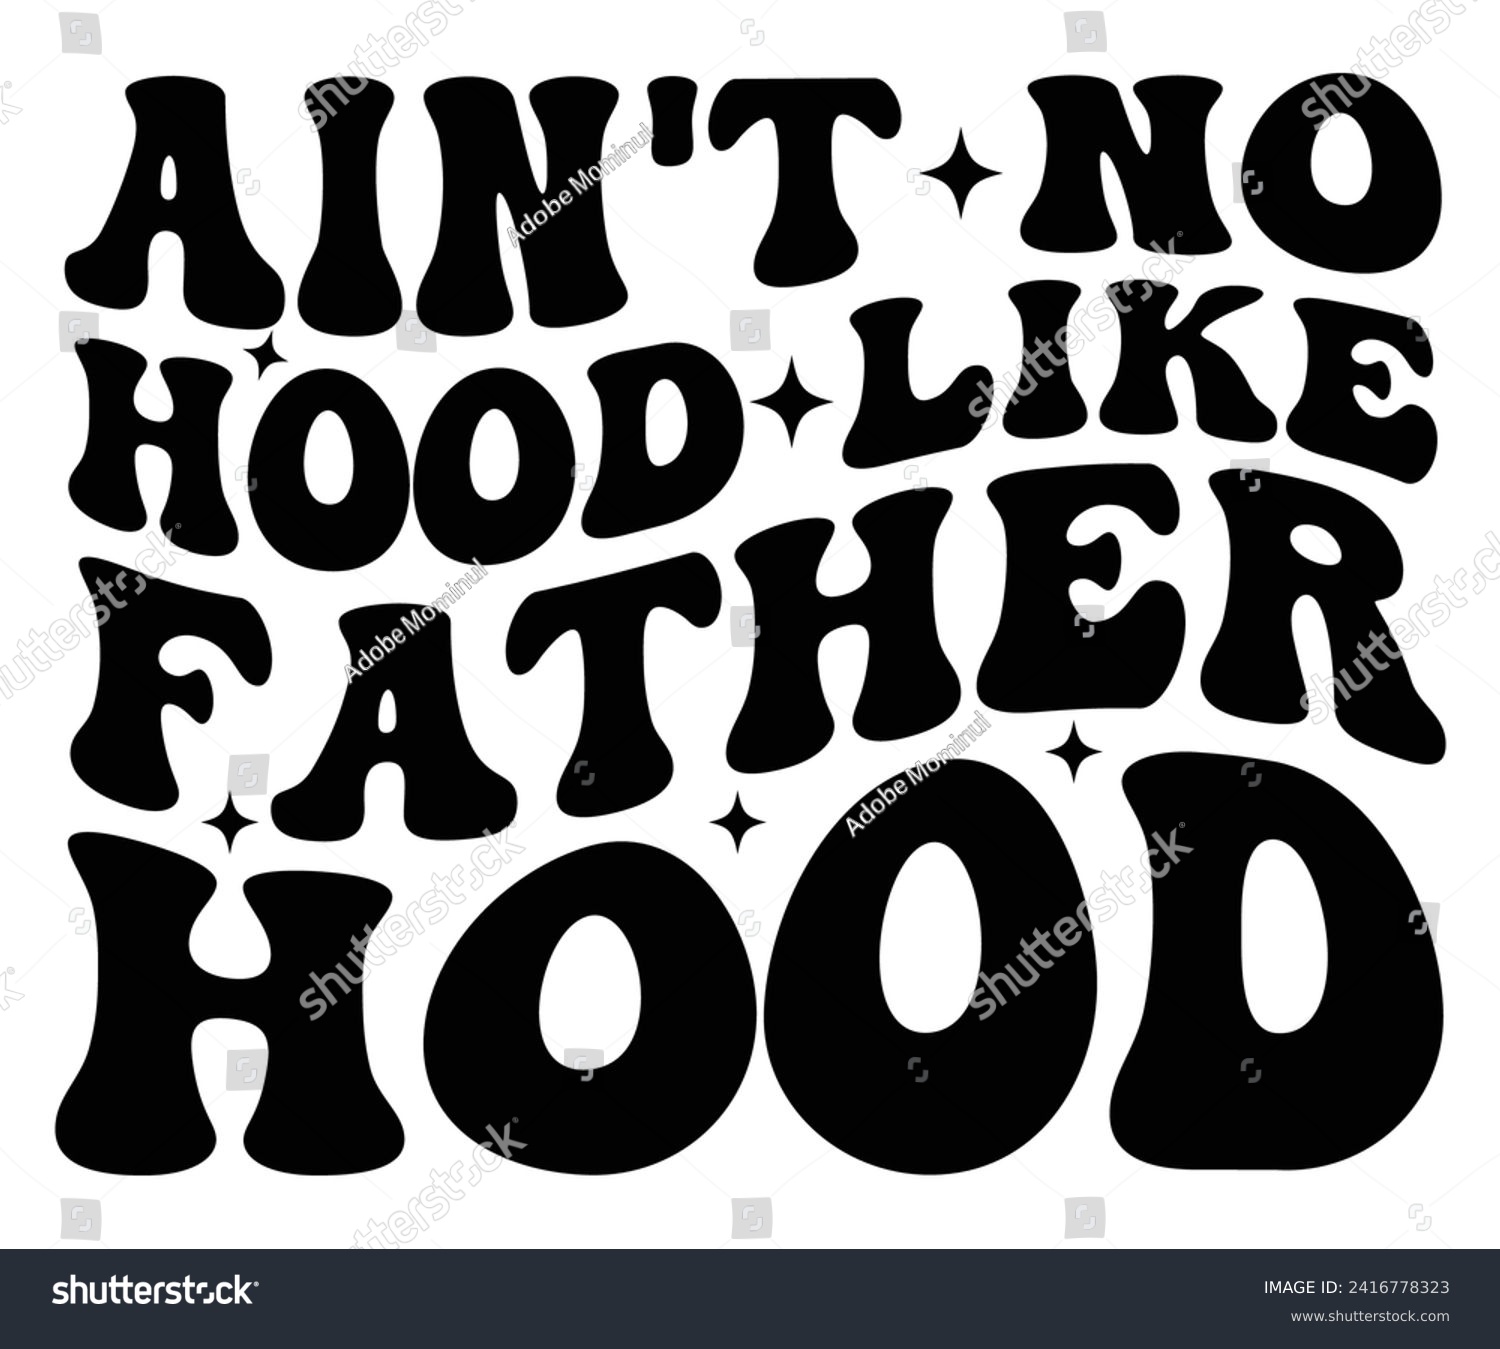 SVG of Ain't No Hood Like Fatherhood Svg,Father's Day Svg,Papa svg,Grandpa Svg,Father's Day Saying Qoutes,Dad Svg,Funny Father, Gift For Dad Svg,Daddy Svg,Family Svg,T shirt Design,Svg Cut File,Typography svg